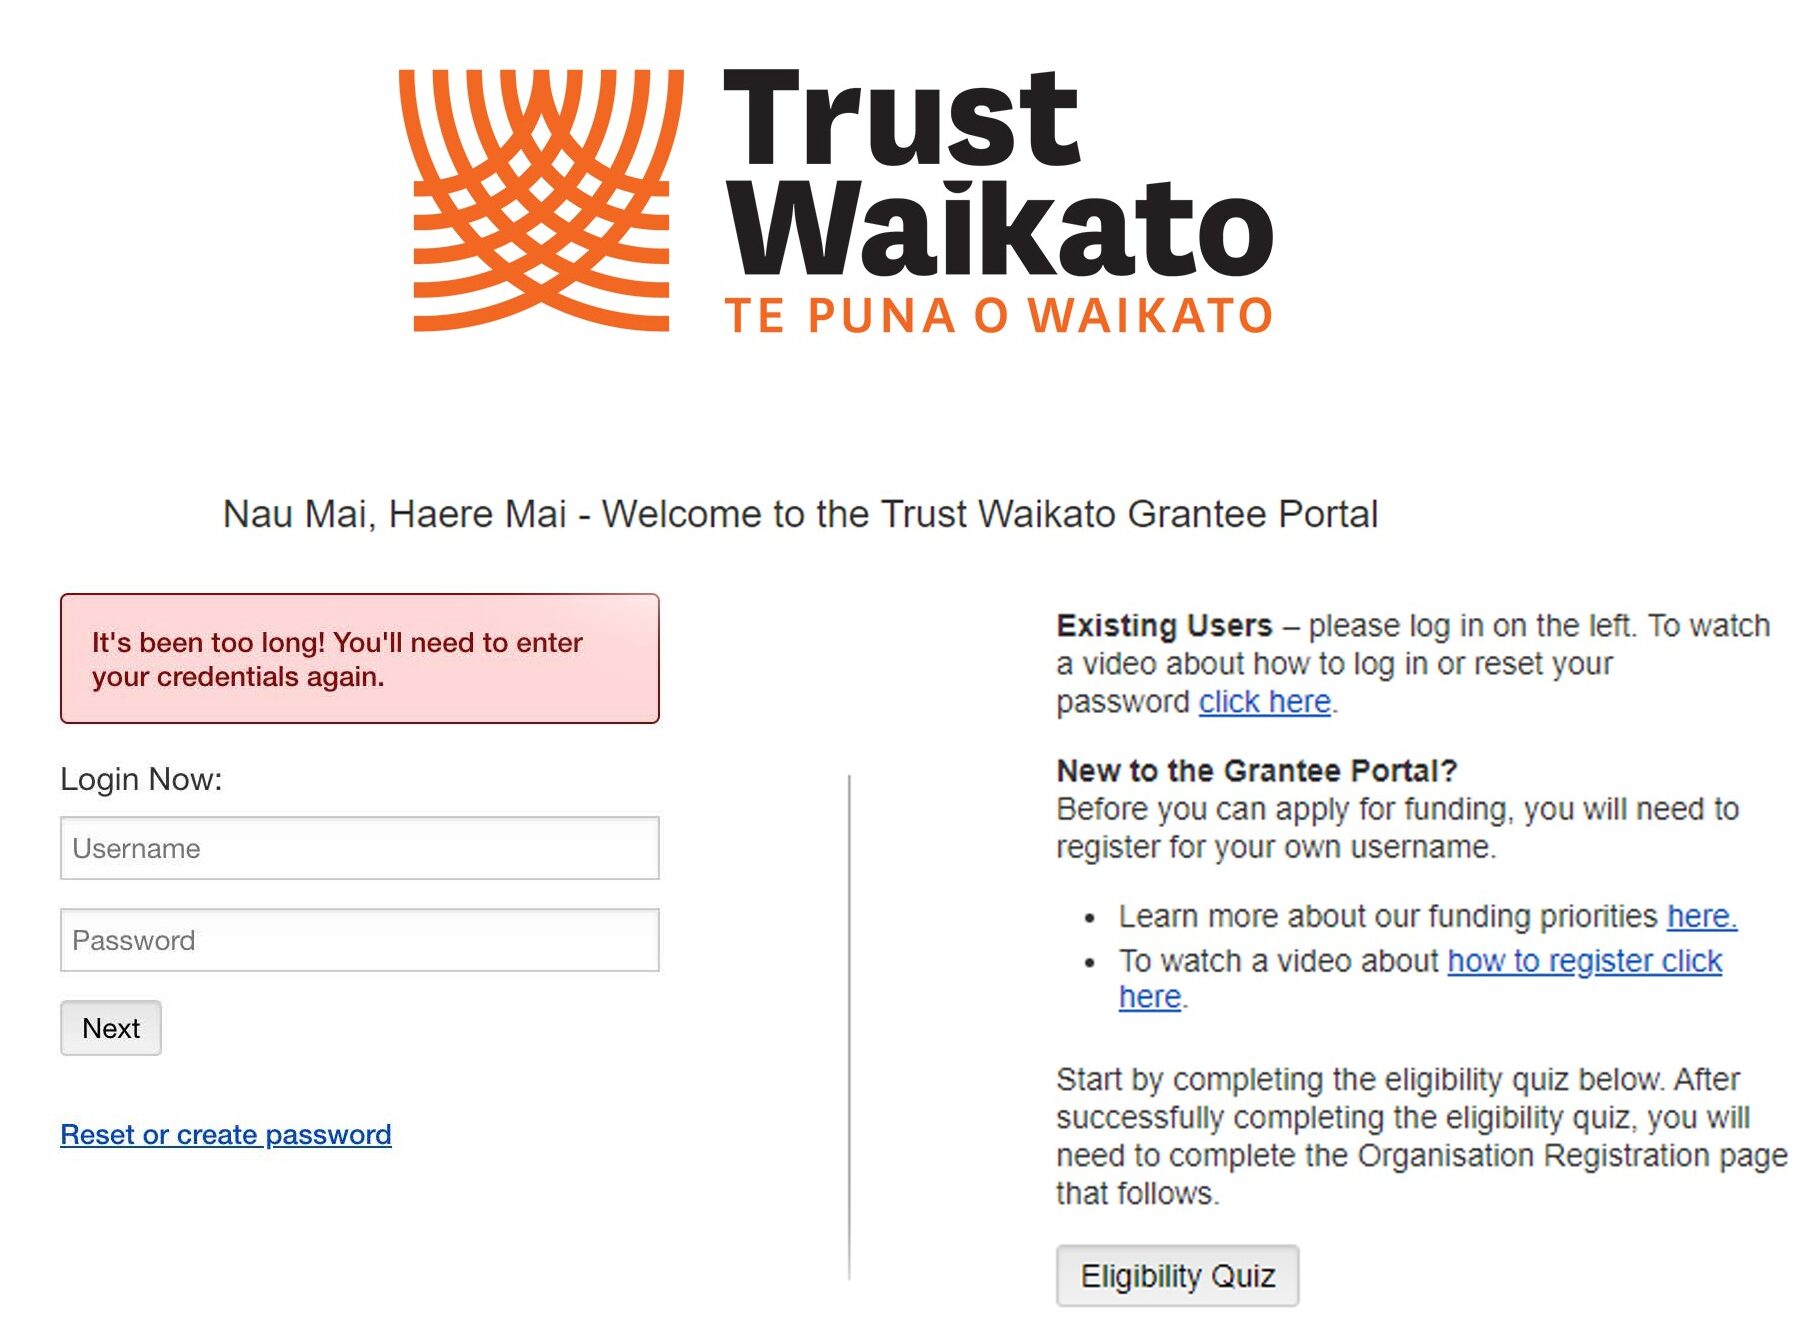 Trust Waikato grantee portal login page showing an error message that requires credentials entered again.